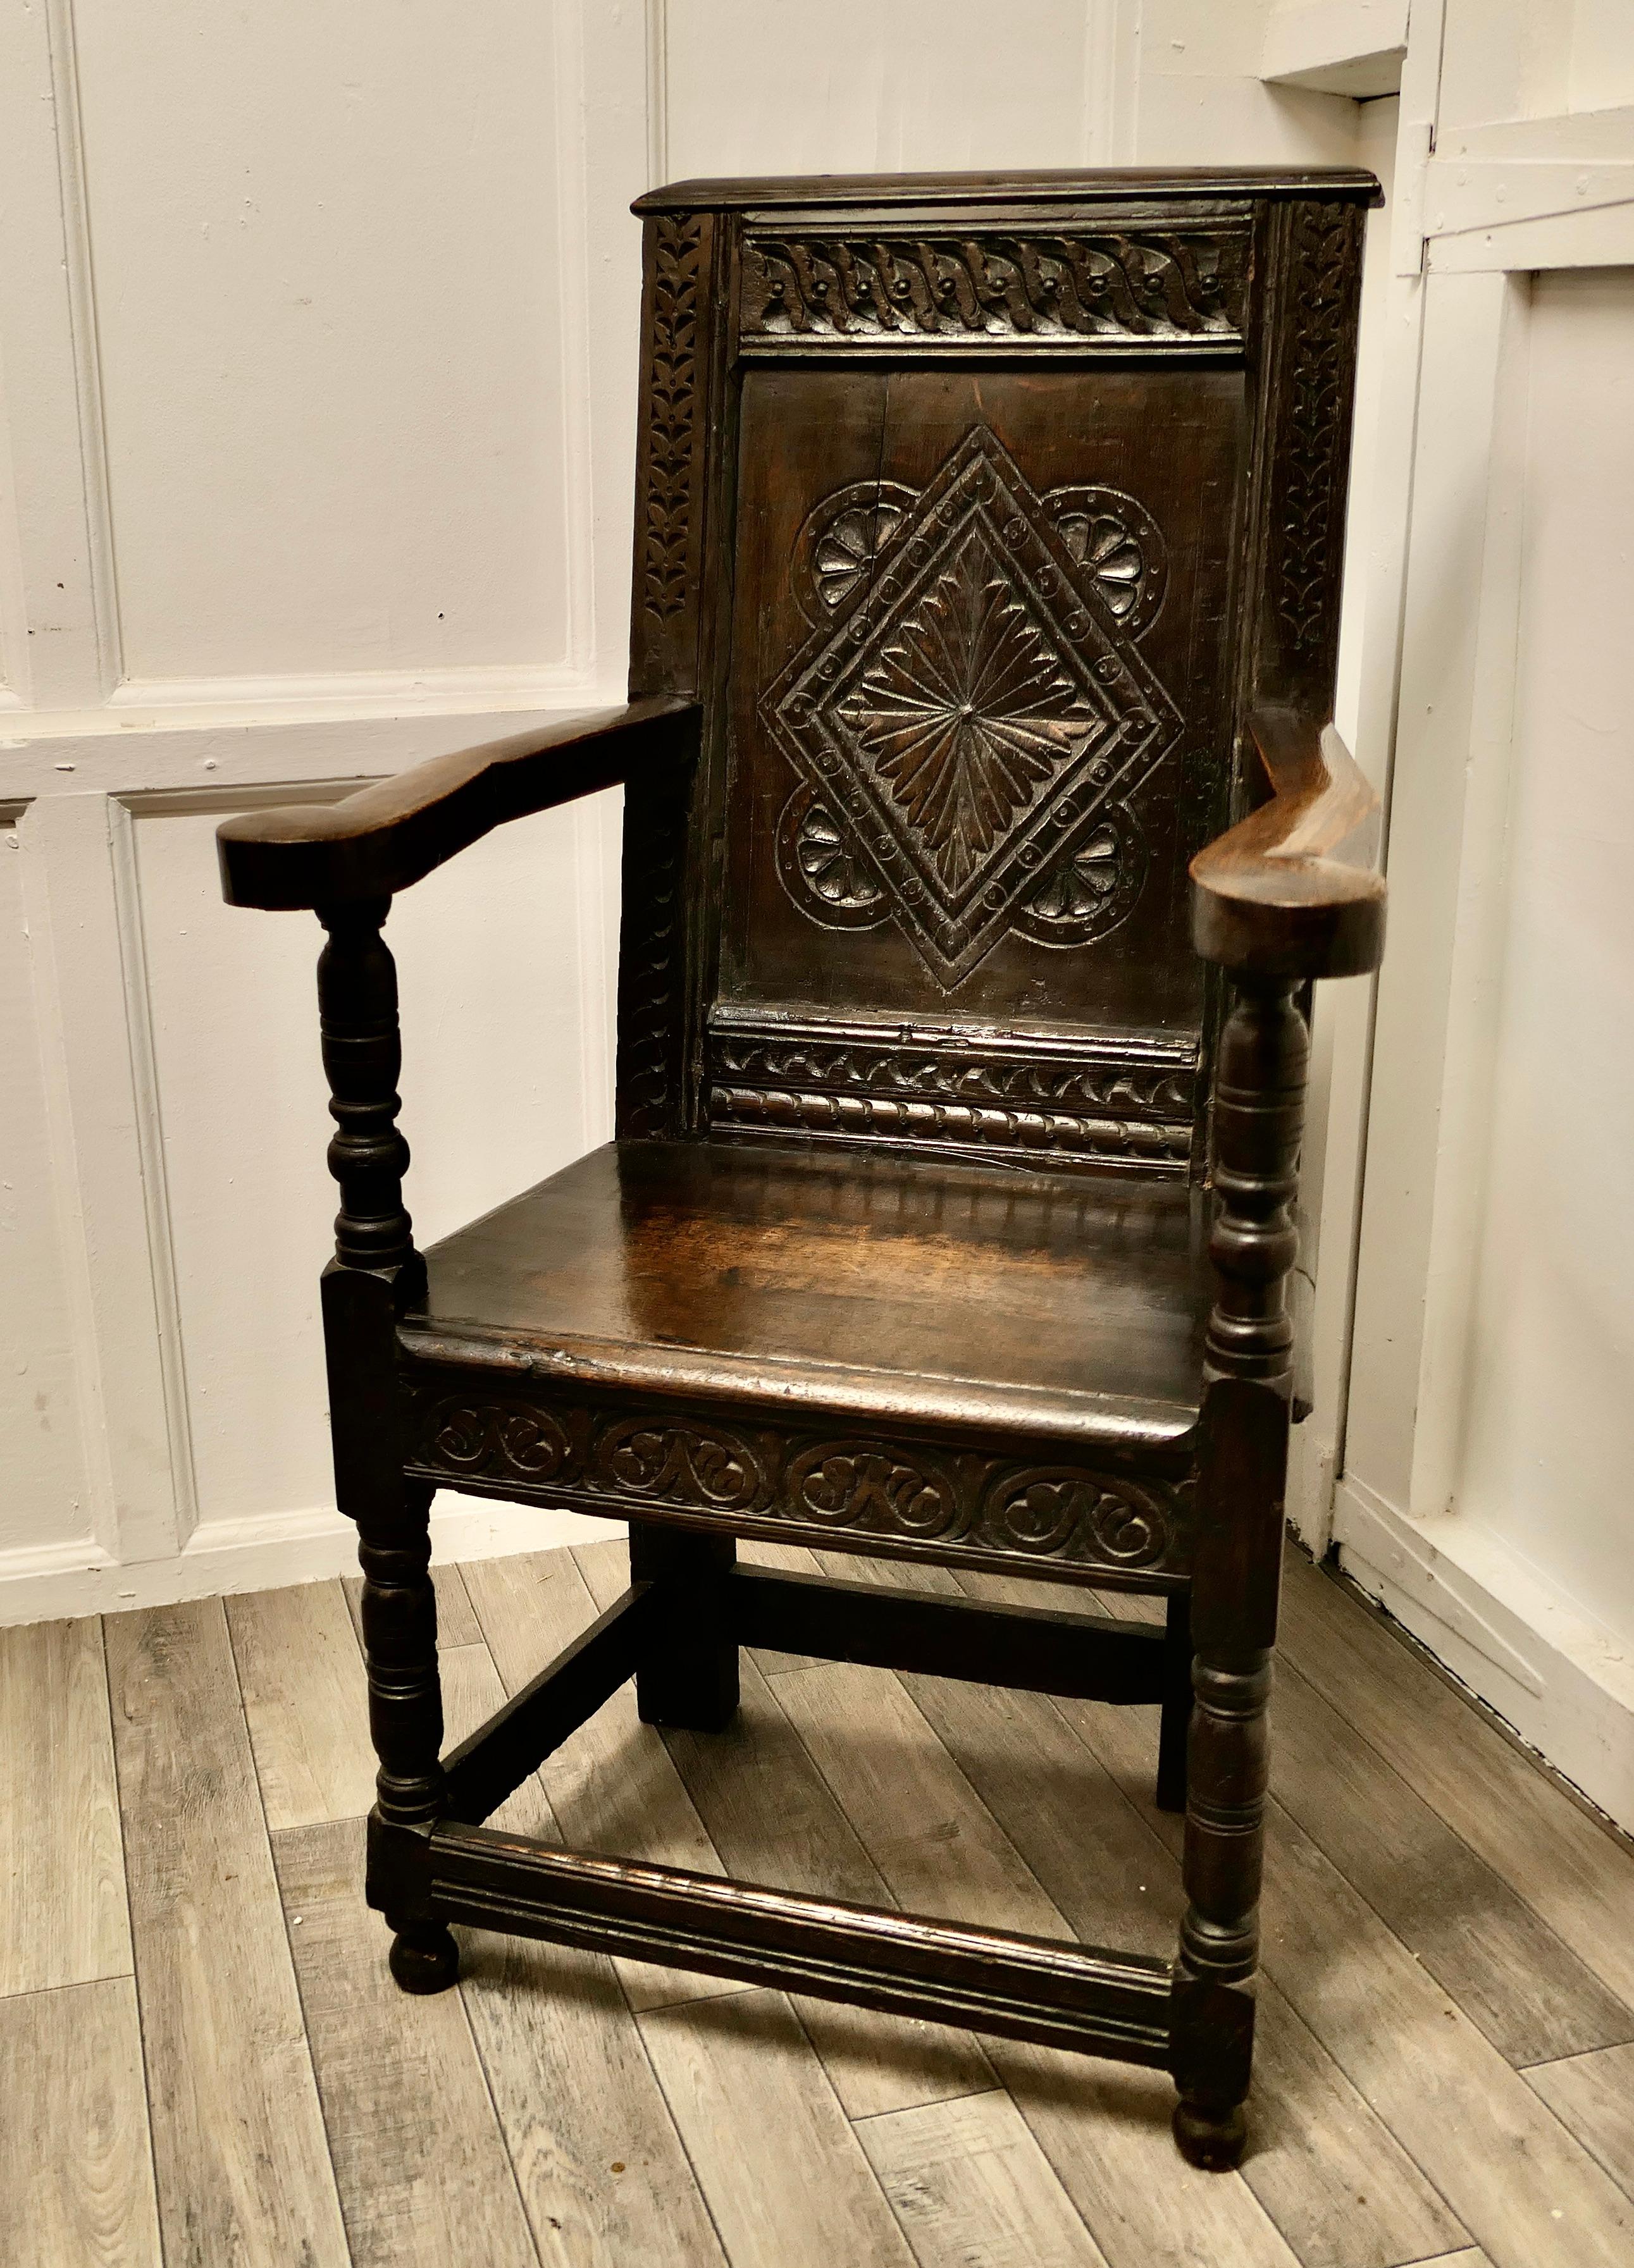 17th Century Oak Wainscot hall chair

This Handsome Chair, has a magnificent patina, the solid plank seat has a little carving to the front border, the back is carved with a large geometric design. The sturdy crook arms are supported with a turned